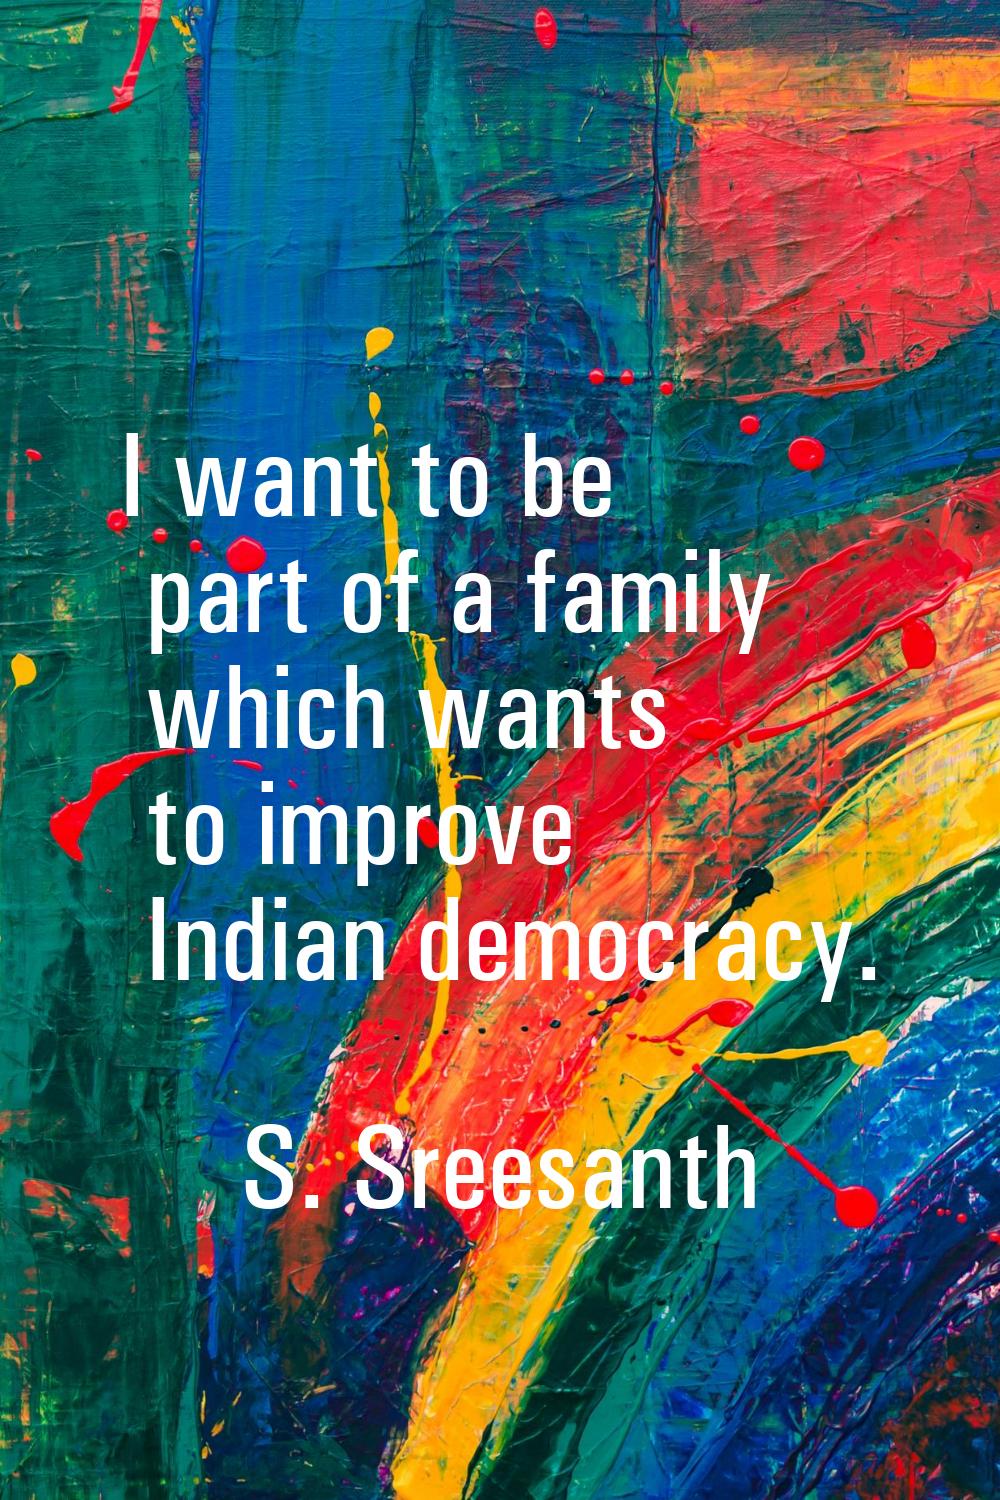 I want to be part of a family which wants to improve Indian democracy.